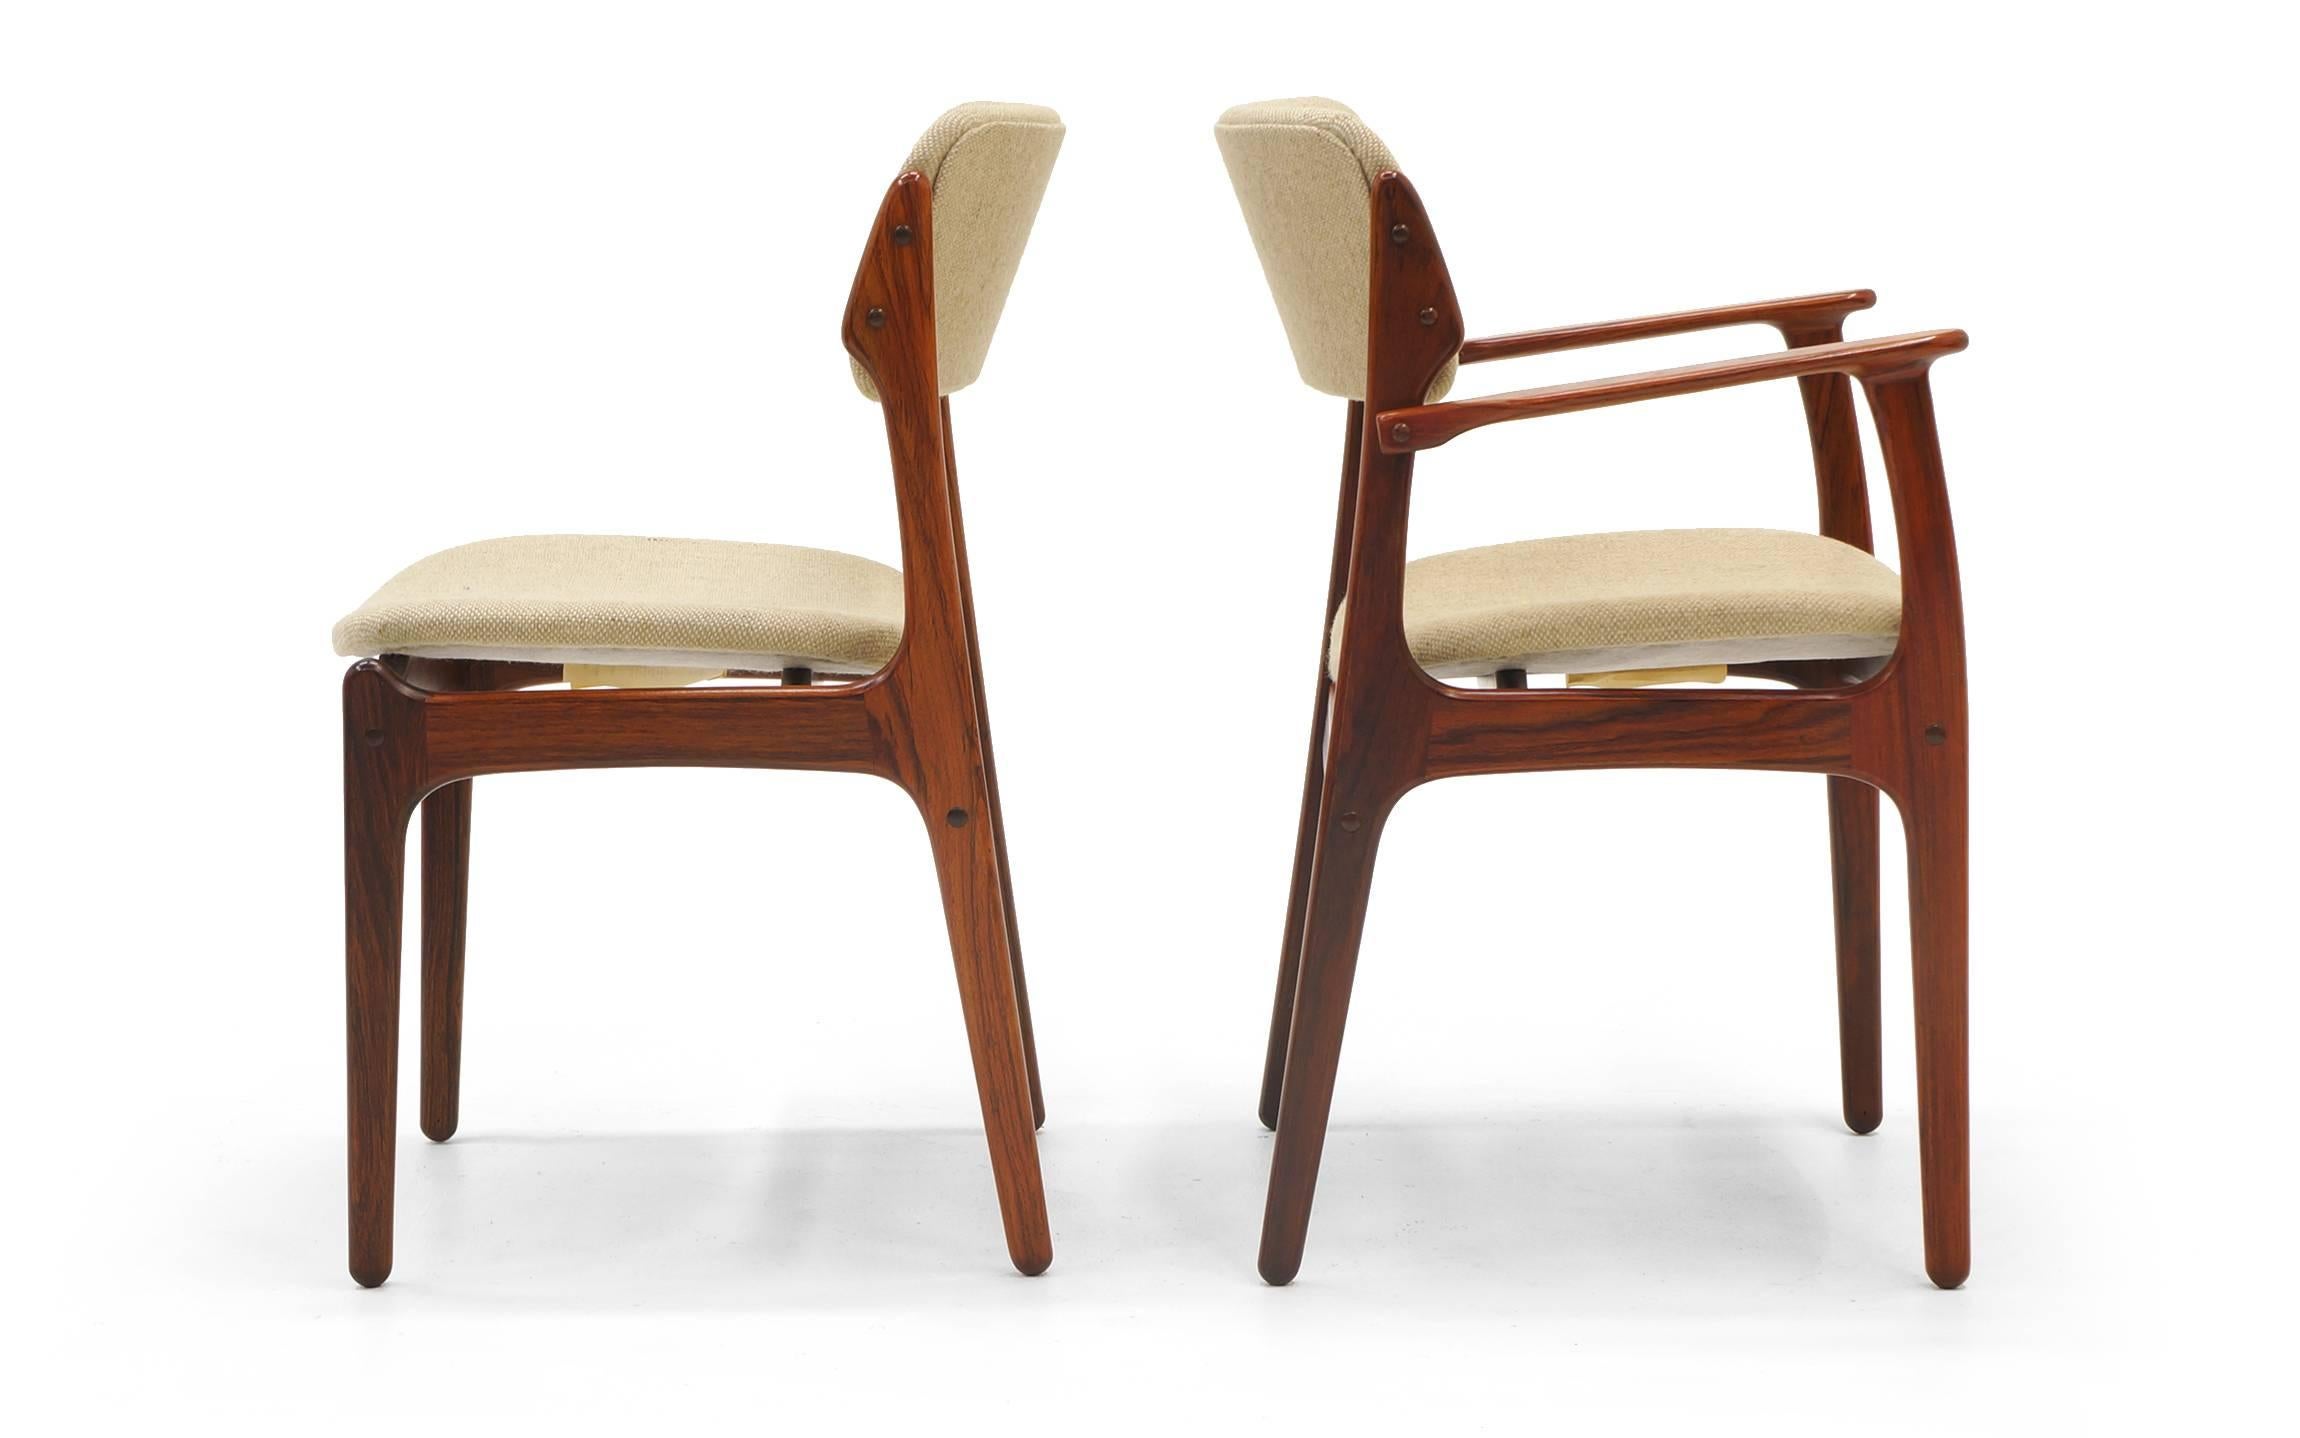 Set of eight rosewood dining chairs by Erik Buch. Two arm chairs and six side chairs. Rosewood frames are in excellent condition. Fabric is in fair condition and is likely a candidate for updating.
Measure: Armchair width is 24 inches, chair width